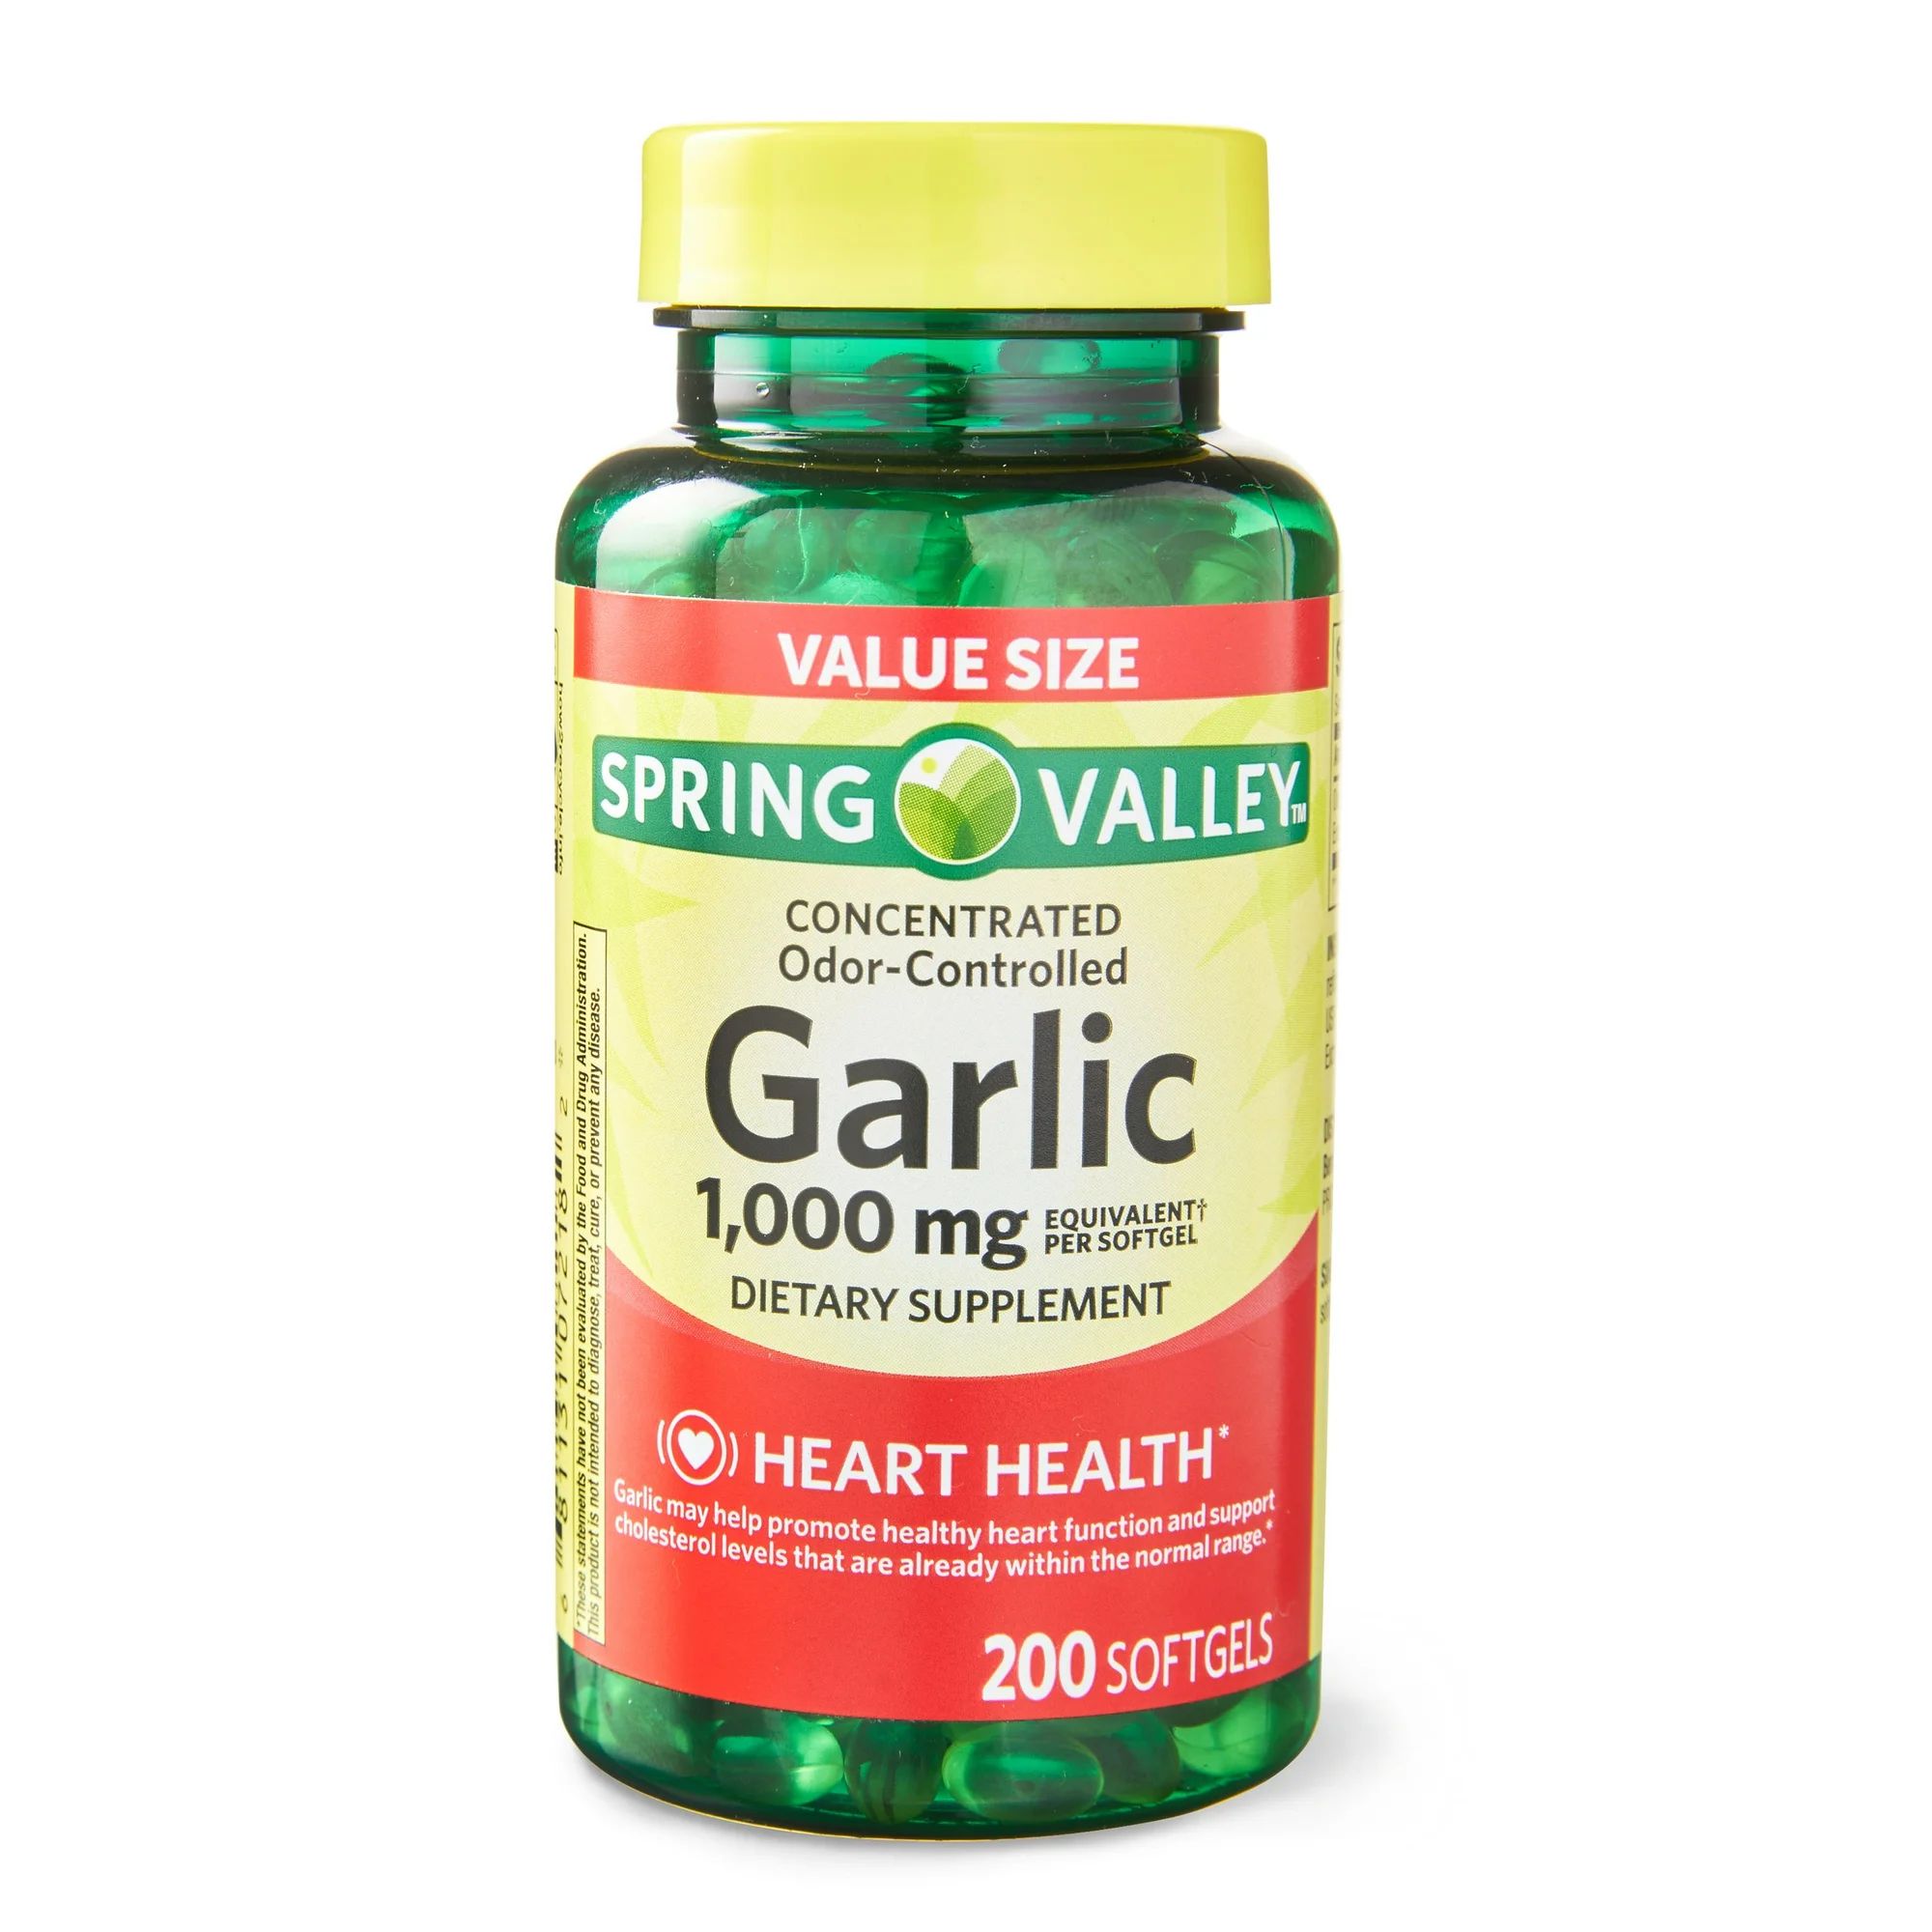 Spring Valley Odor-Controlled Garlic Softgels Dietary Supplement Value Size, 1,000 mg, 200 Count ... | Walmart (US)